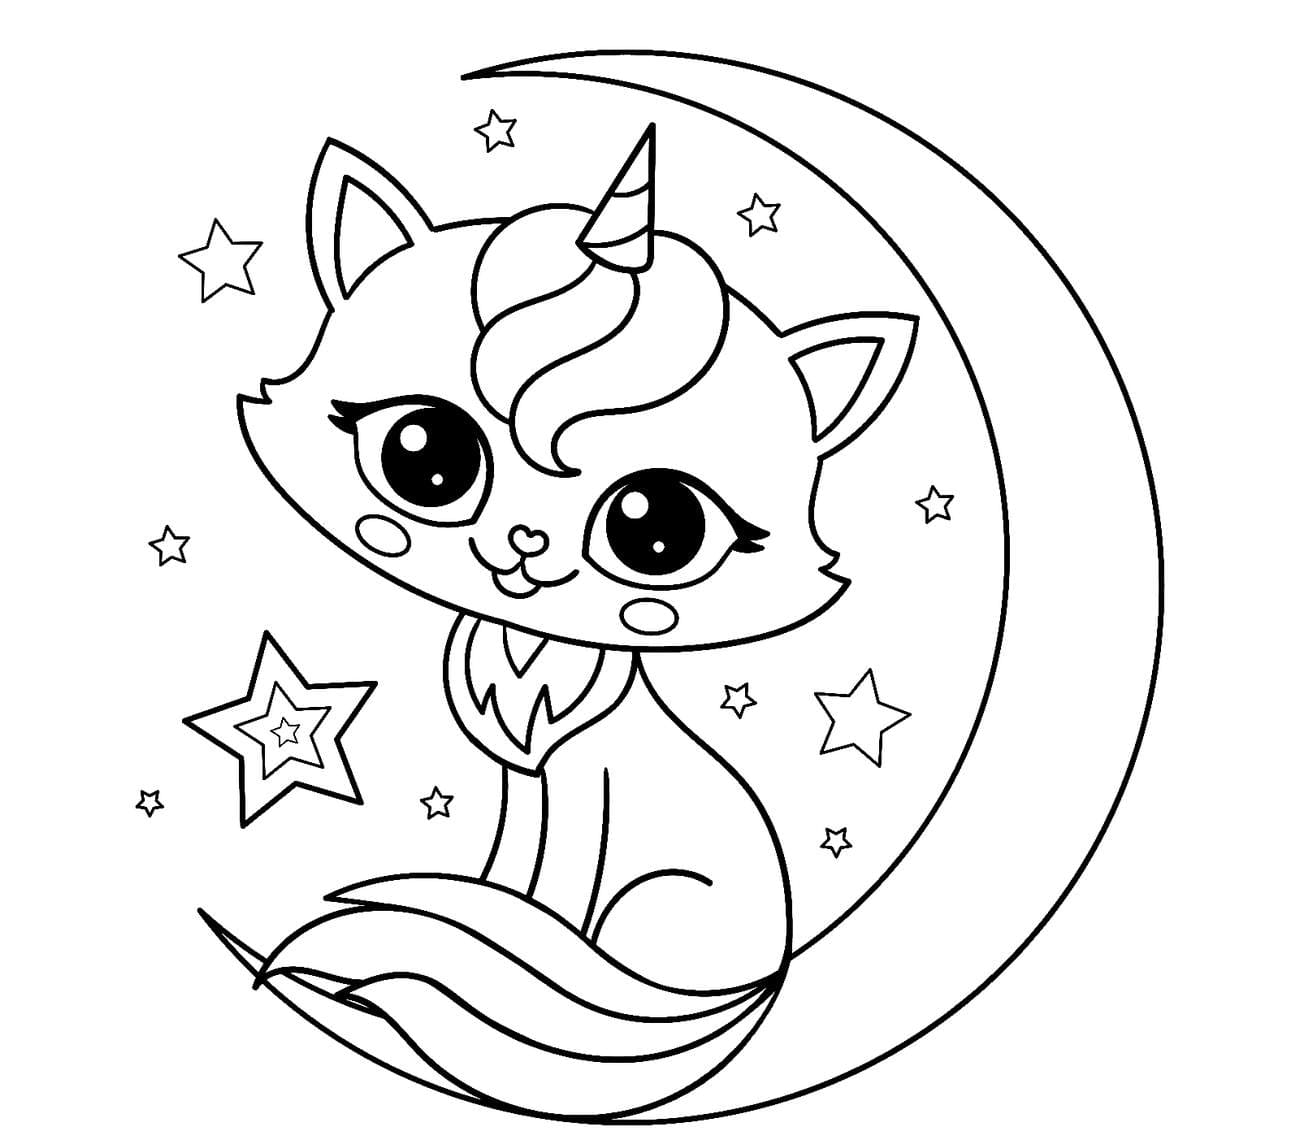 Coloring page Unicorn Cat night character